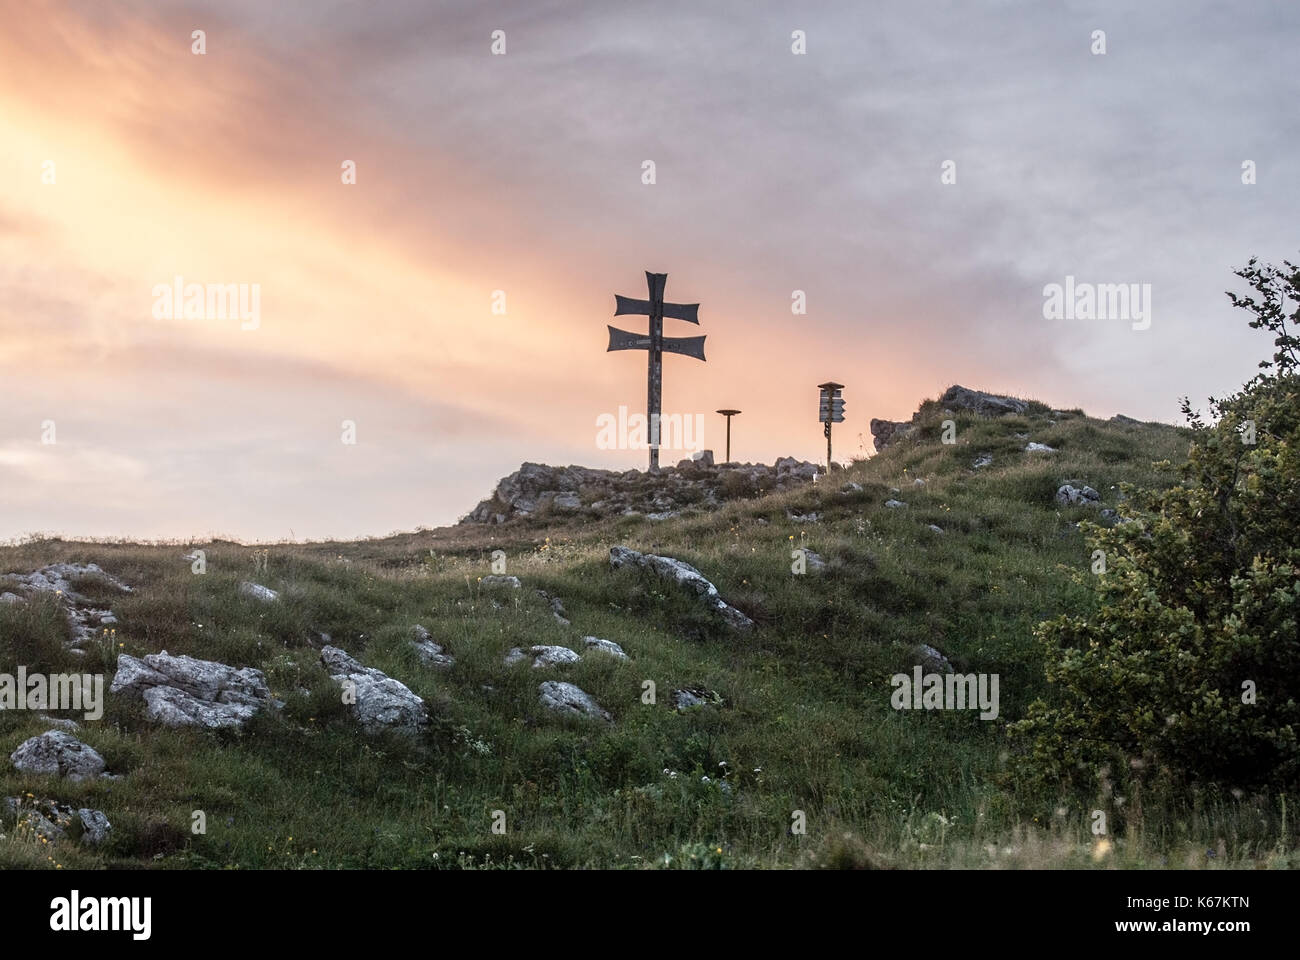 Klak hill eith cross, mountain meadow and limestone stones in Mala Fatra mountains in Slovakia during sunset with colorful sky Stock Photo